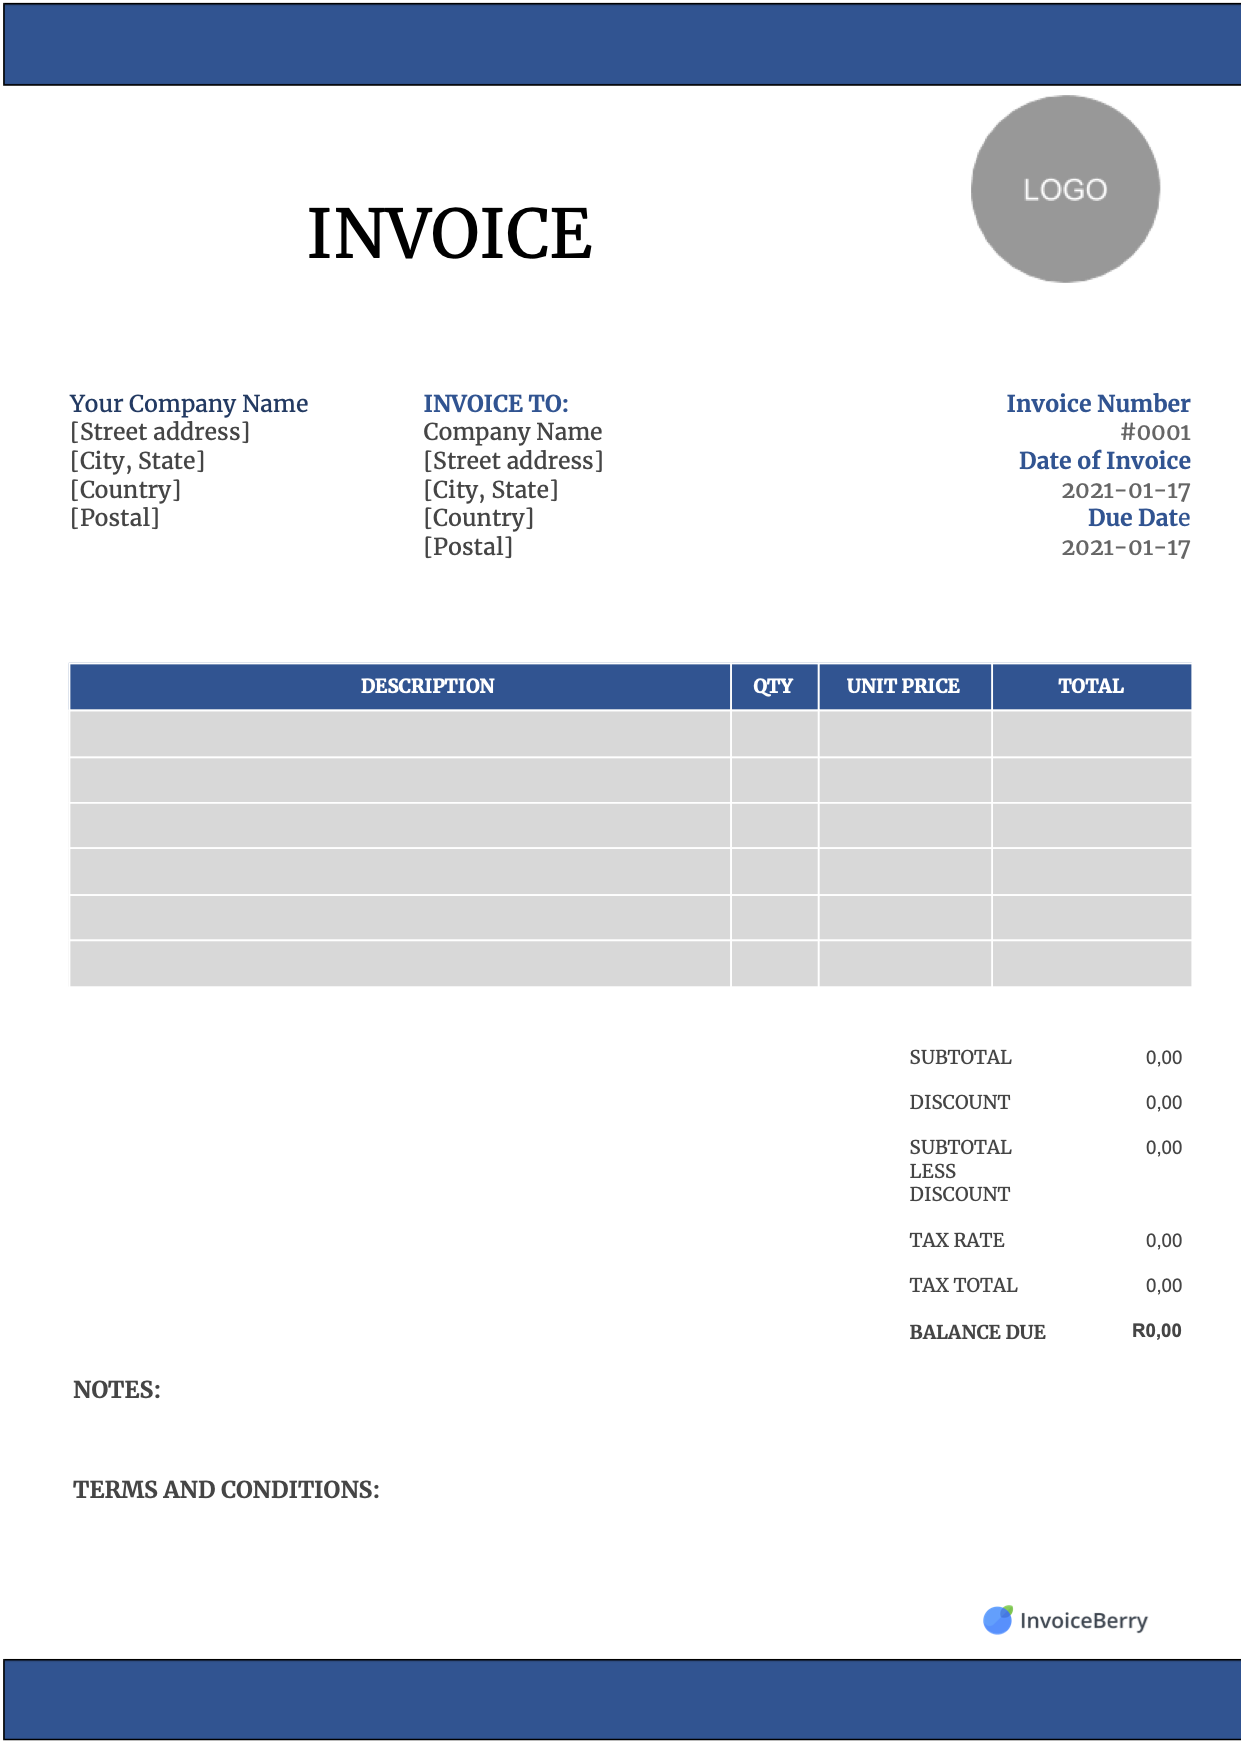 Free Invoice Templates Download - All Formats and Industries With Regard To Download An Invoice Template